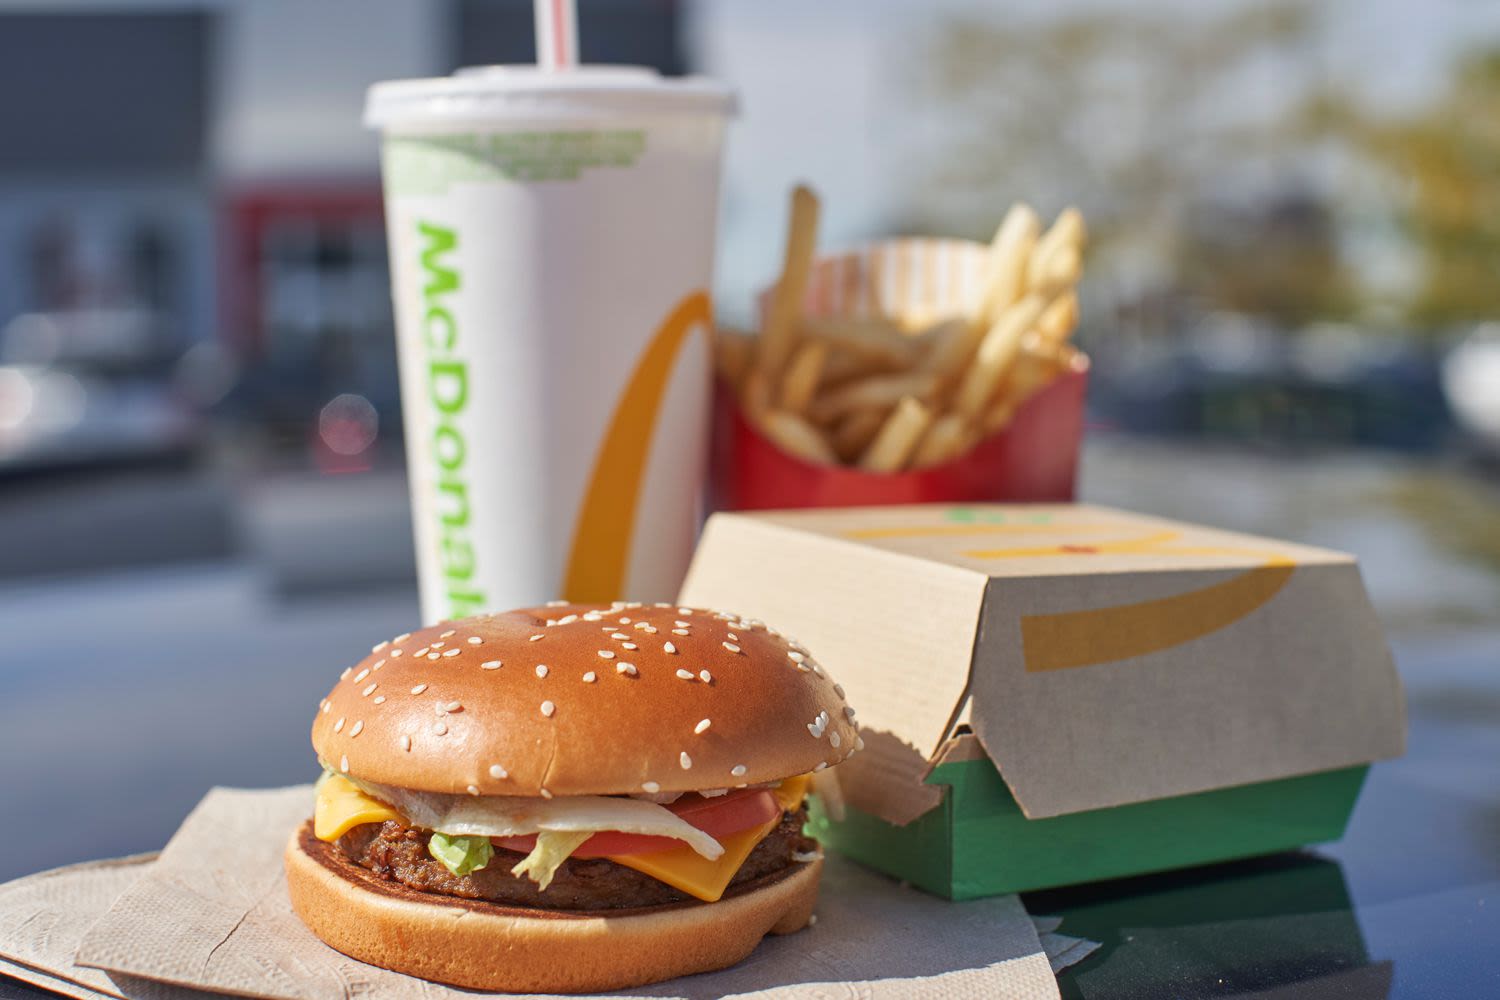 Yes, a McDonald's Location Charged $18 for a Big Mac — But the Chain Says That Was the 'Exception'